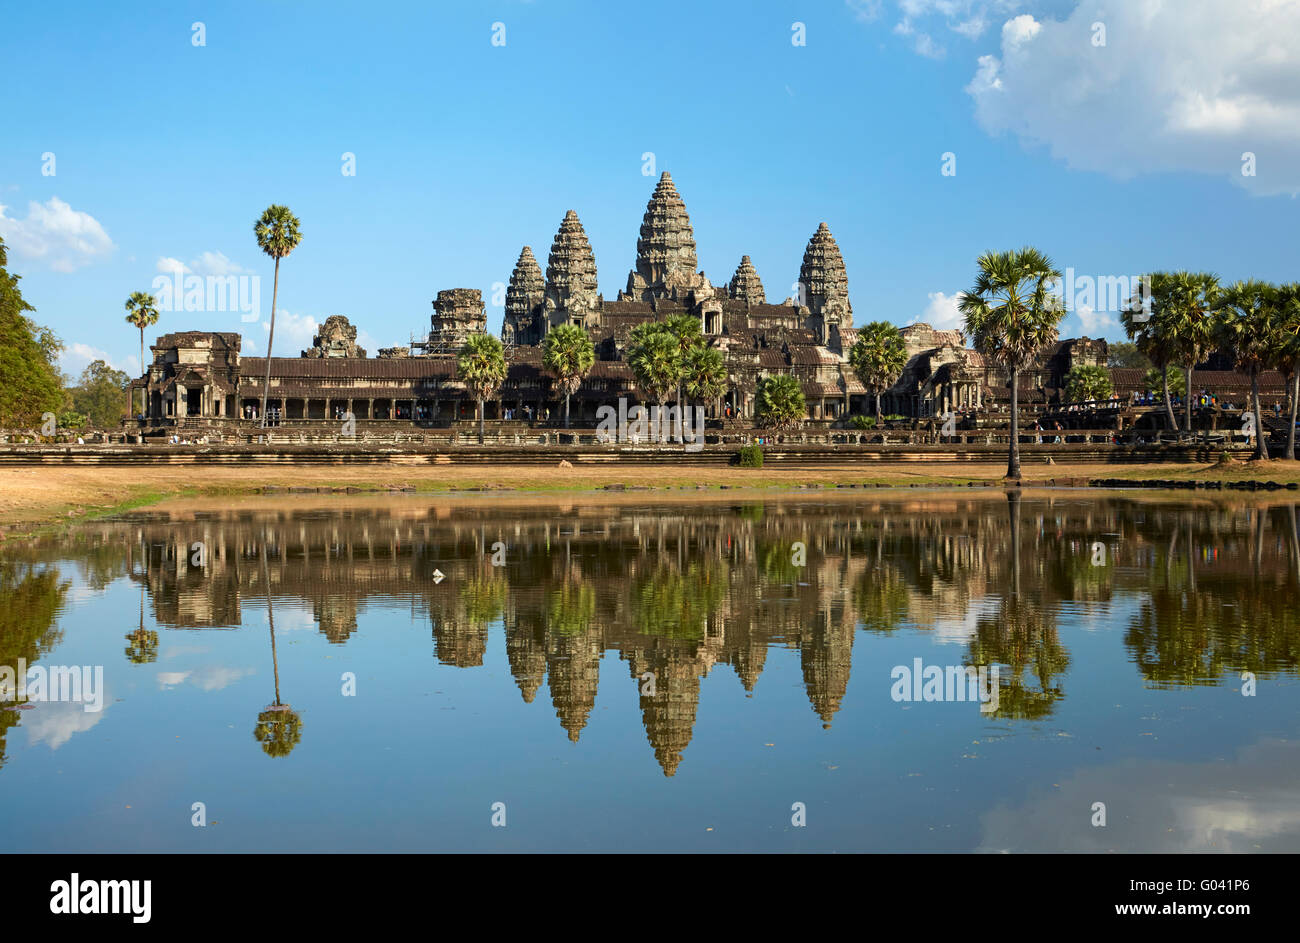 Angkor Wat temple complex (12th century), Angkor World Heritage Site, Siem Reap, Cambodia Stock Photo